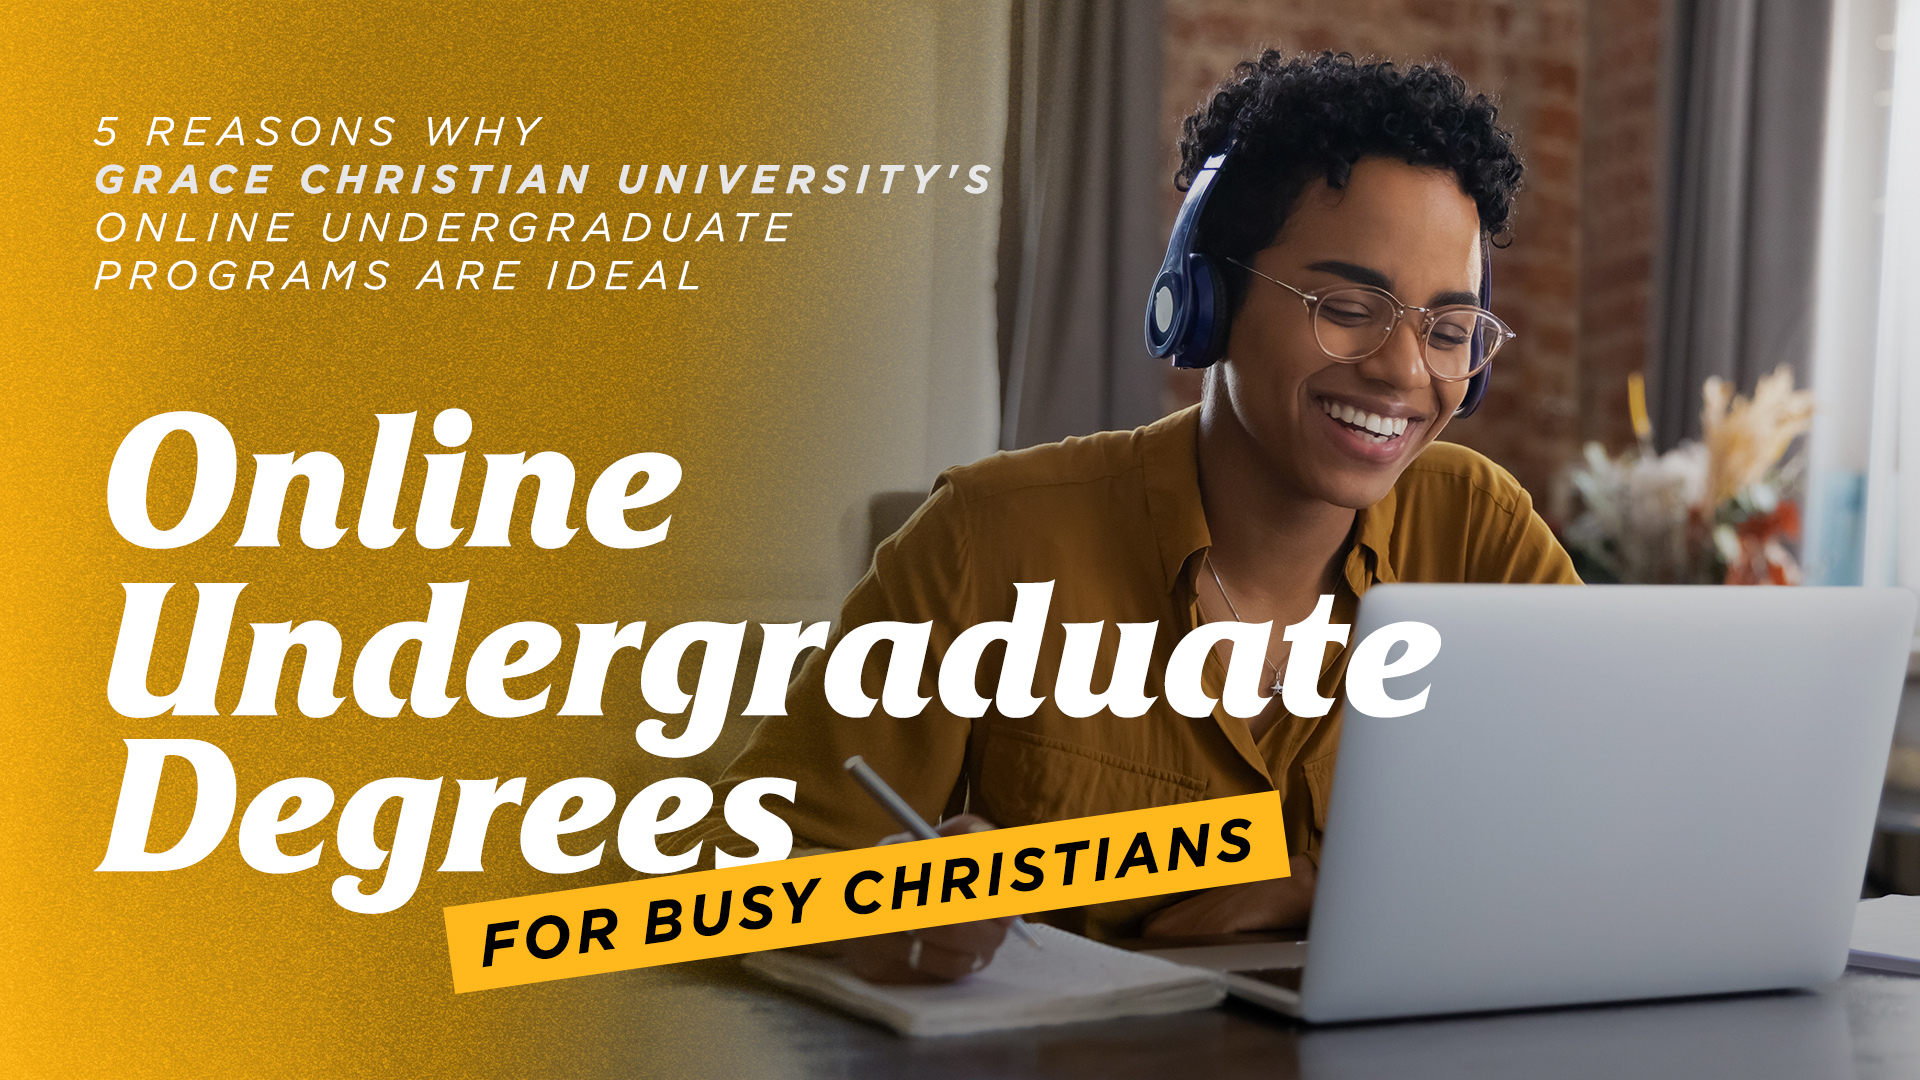 Online Undergraduate Degrees for Busy Christians - 5 Reasons Why Grace Christian University's Online Undergraduate Programs are Ideal